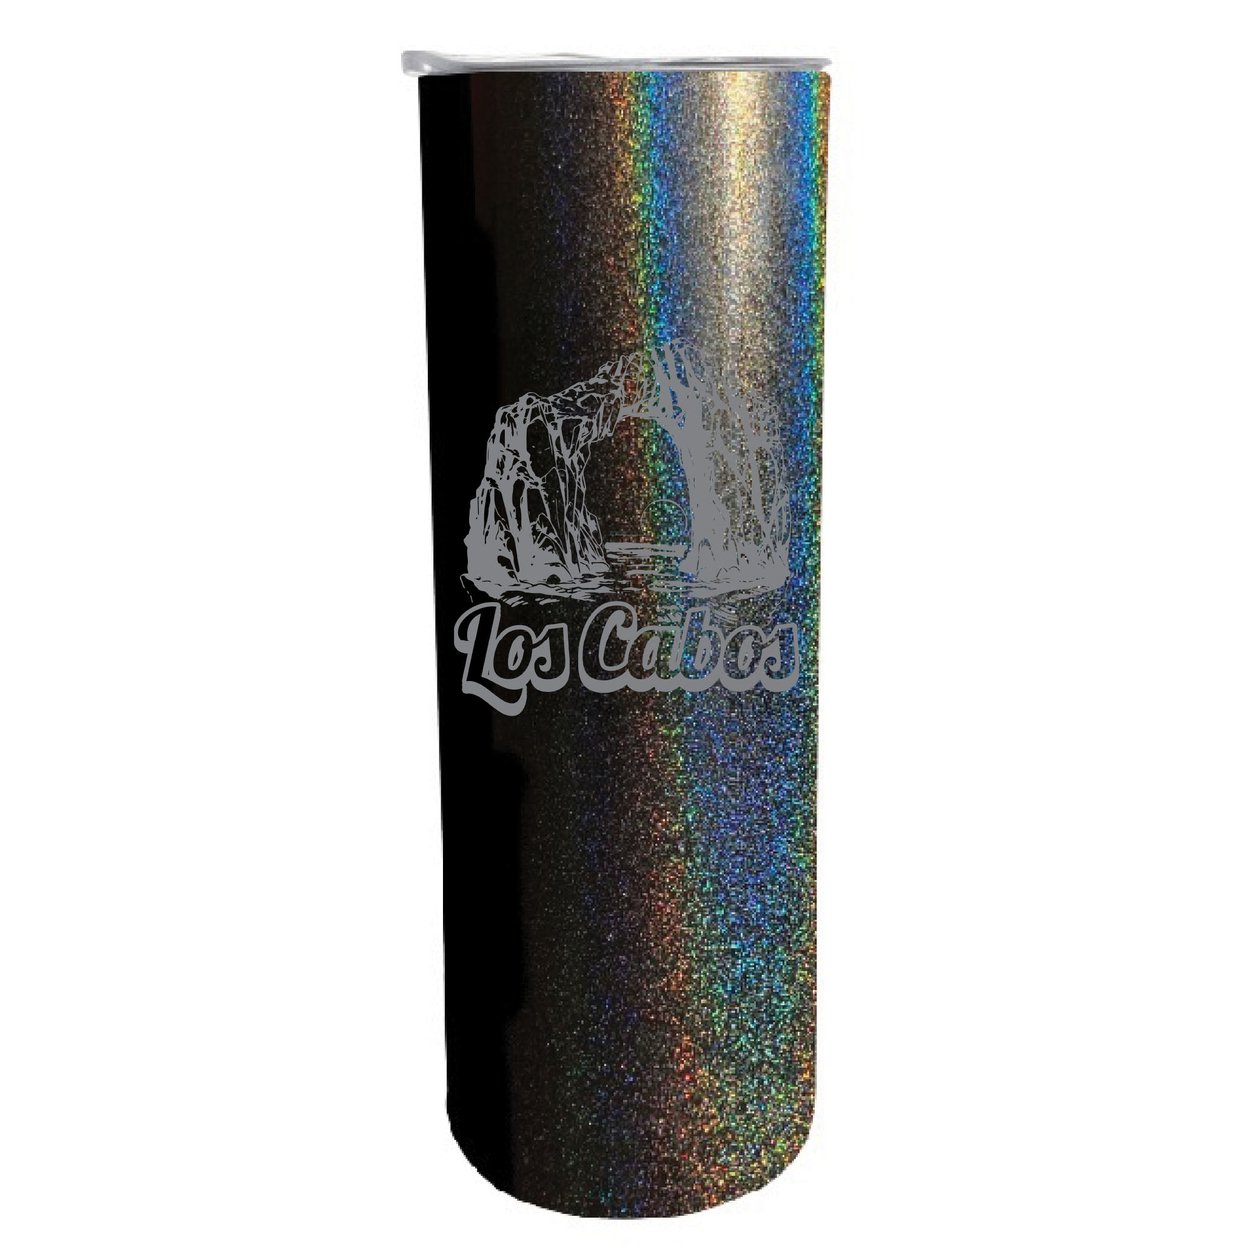 Los Cabos Mexico Souvenir 20 Oz Engraved Insulated Stainless Steel Skinny Tumbler - Black Glitter,,Single Unit